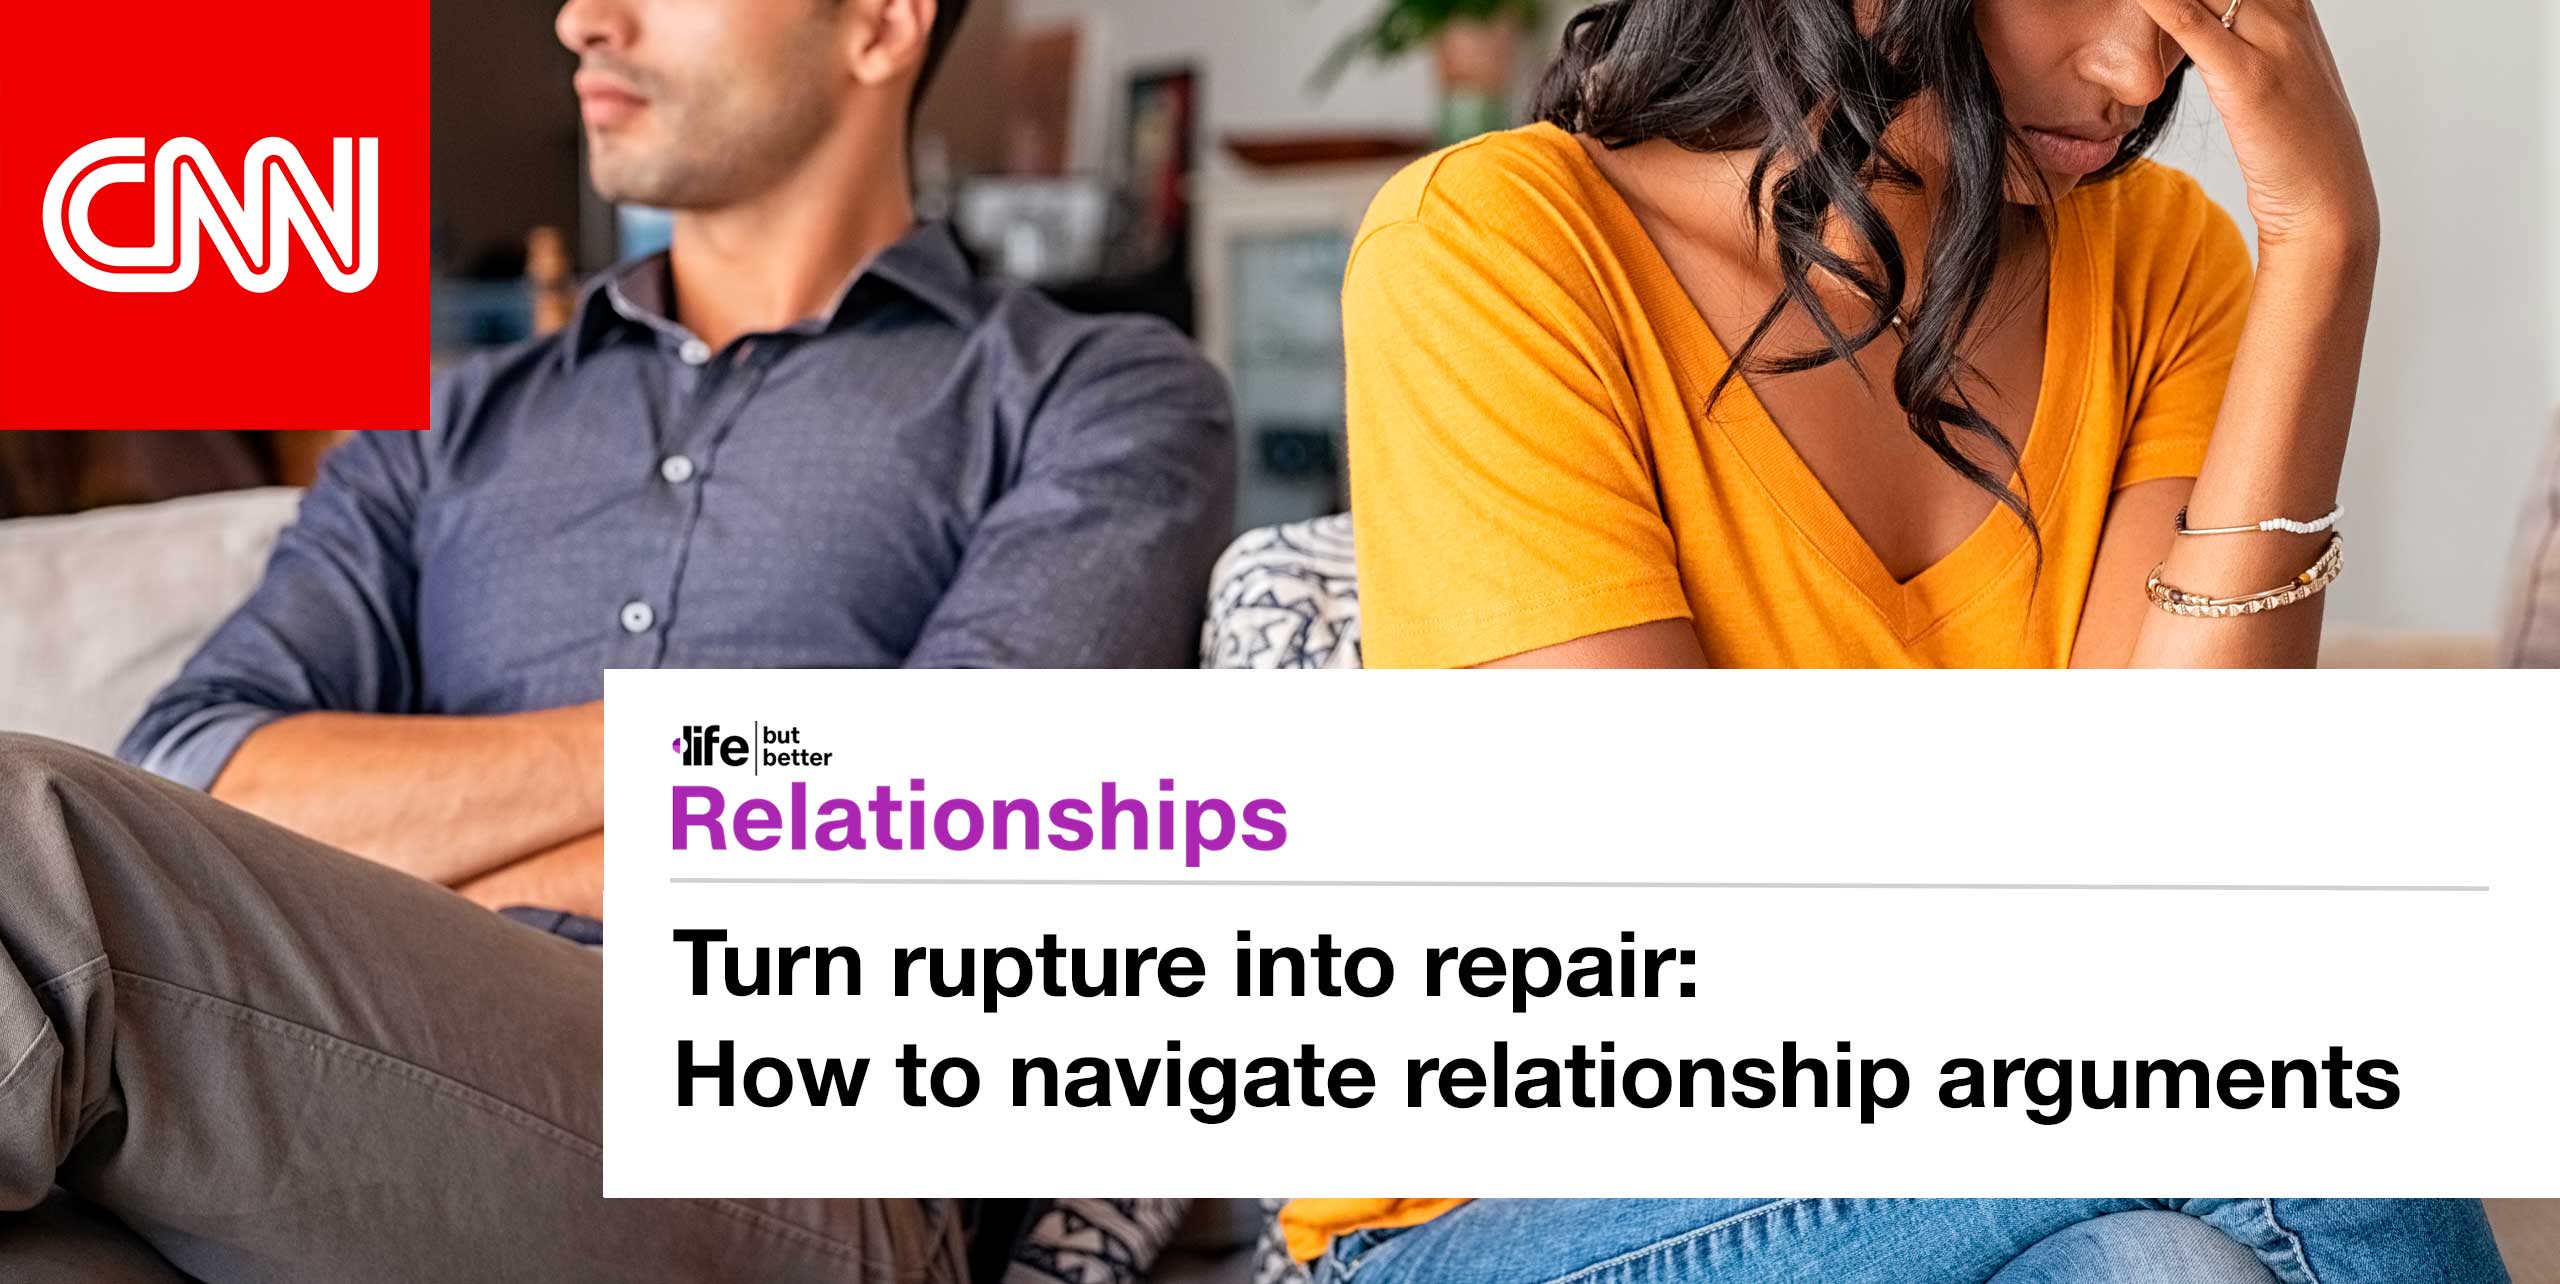 CNN logo and photo of couple turning away from one another. CNN tagline: life but better. Section: Relationships Headline: Turn rupture into repair. How to navigate relationship arguments.